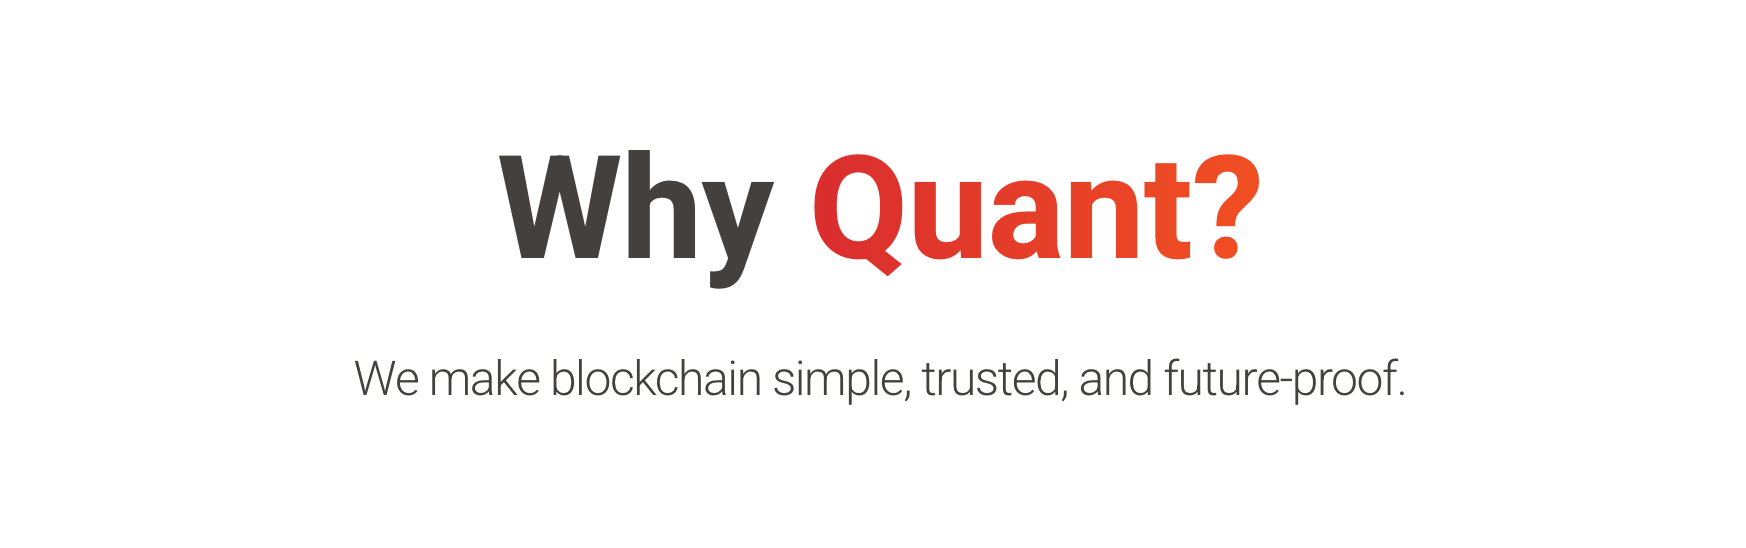 “Why Quant” banner.